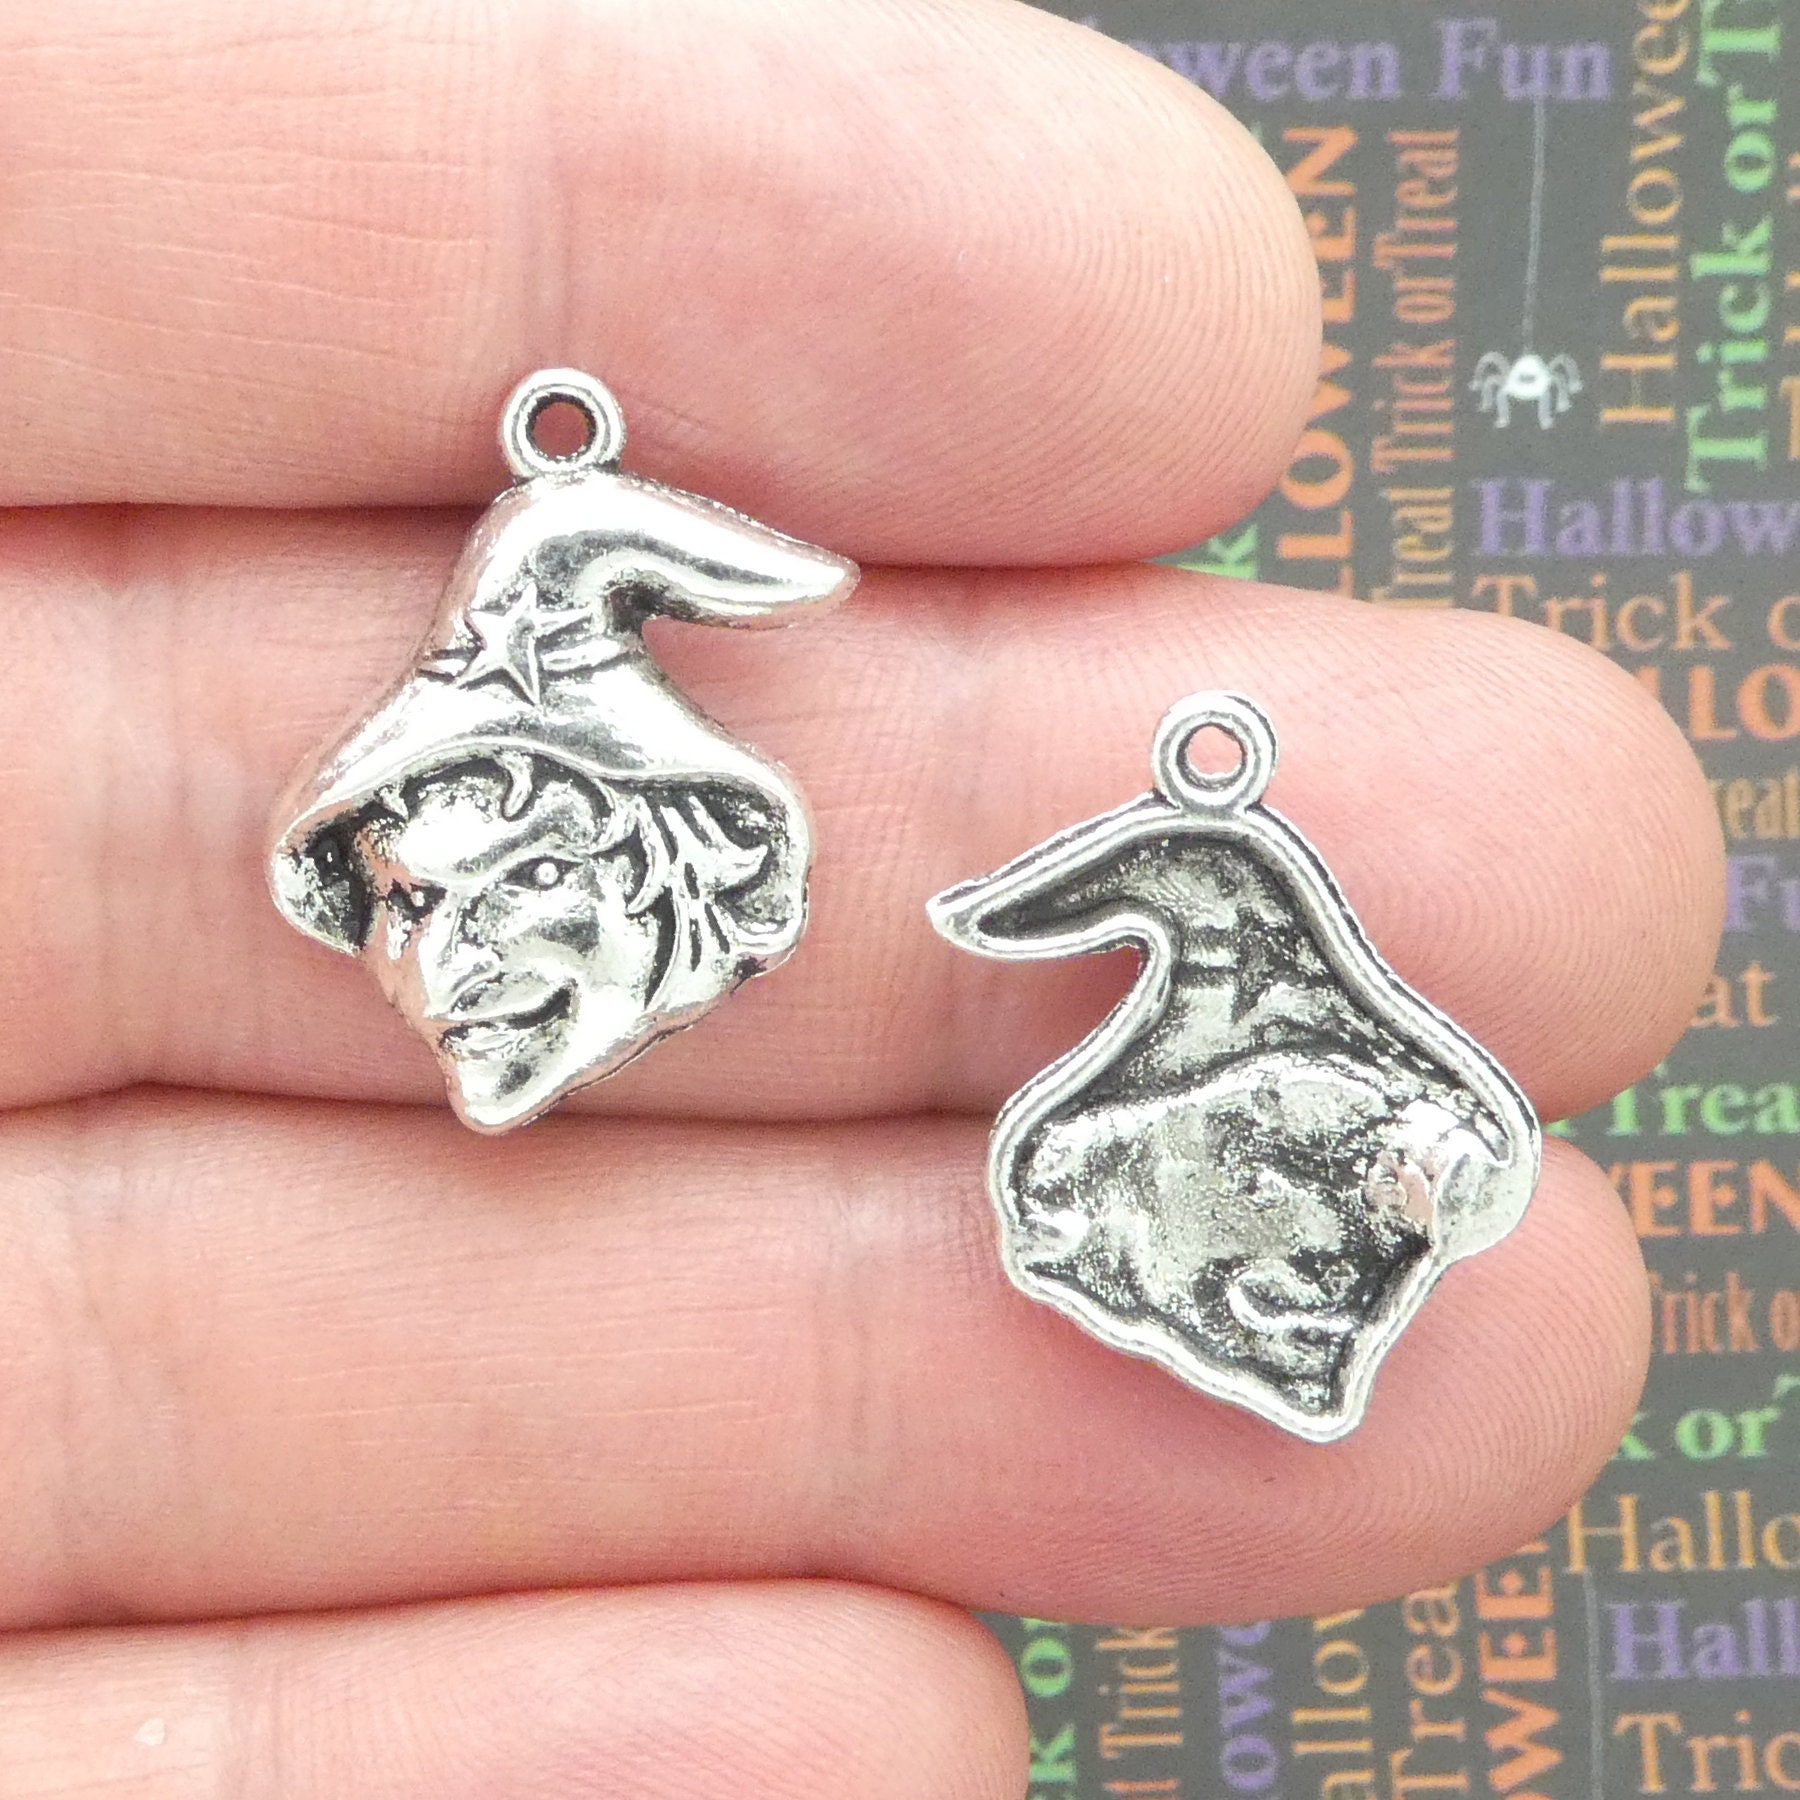 60pcs witch Charms silver tone witch charm pendant 10x9mm